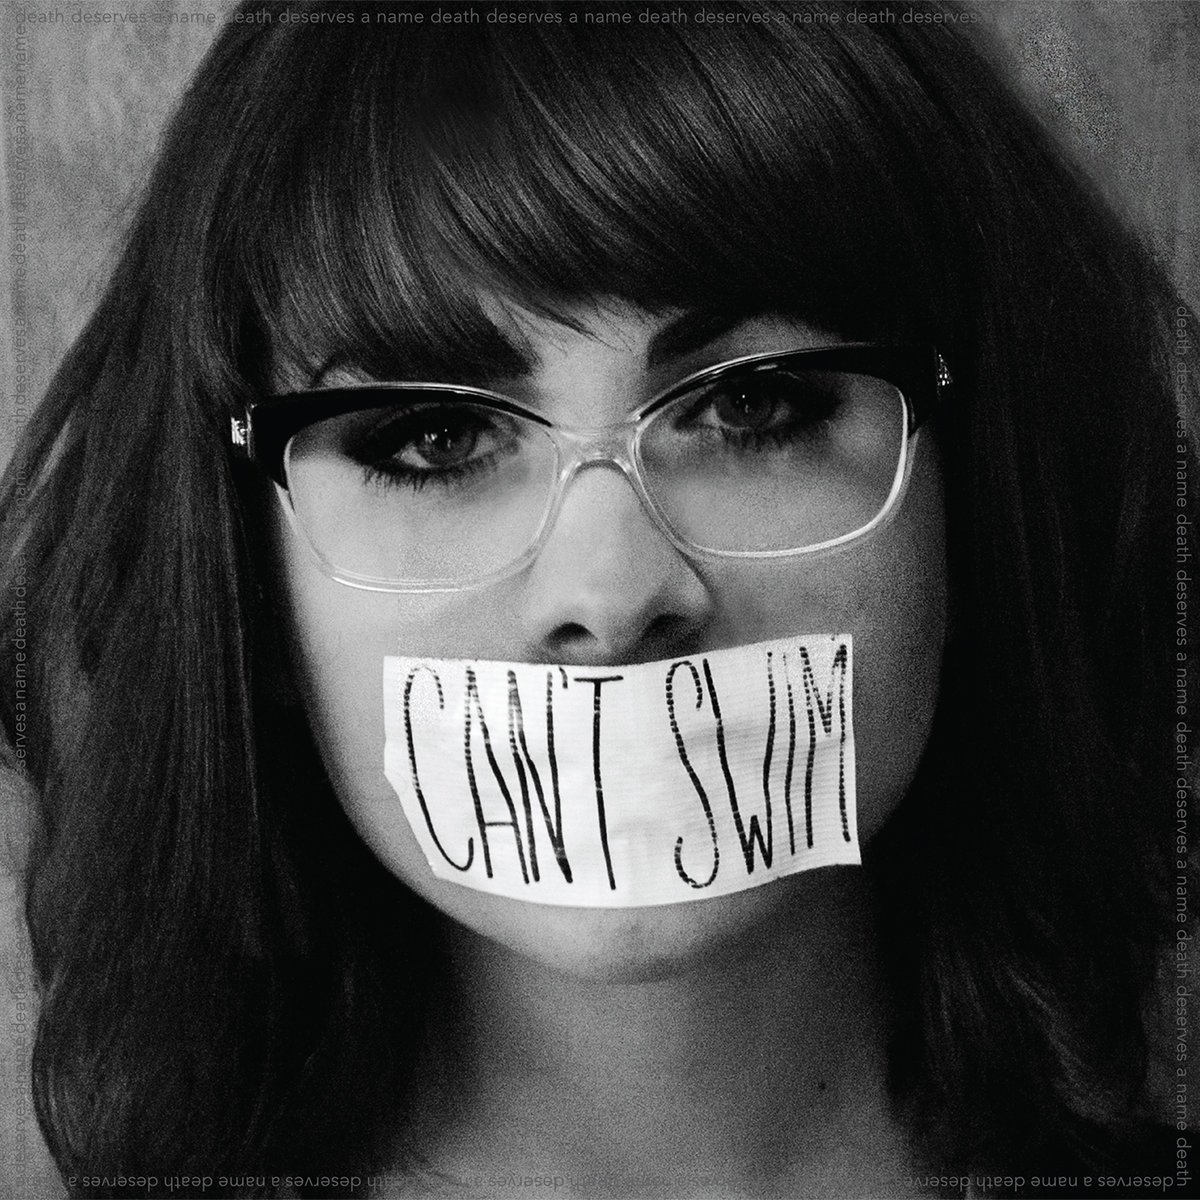 Can't Swim - Death Deserves A Name (2016) FLAC Download